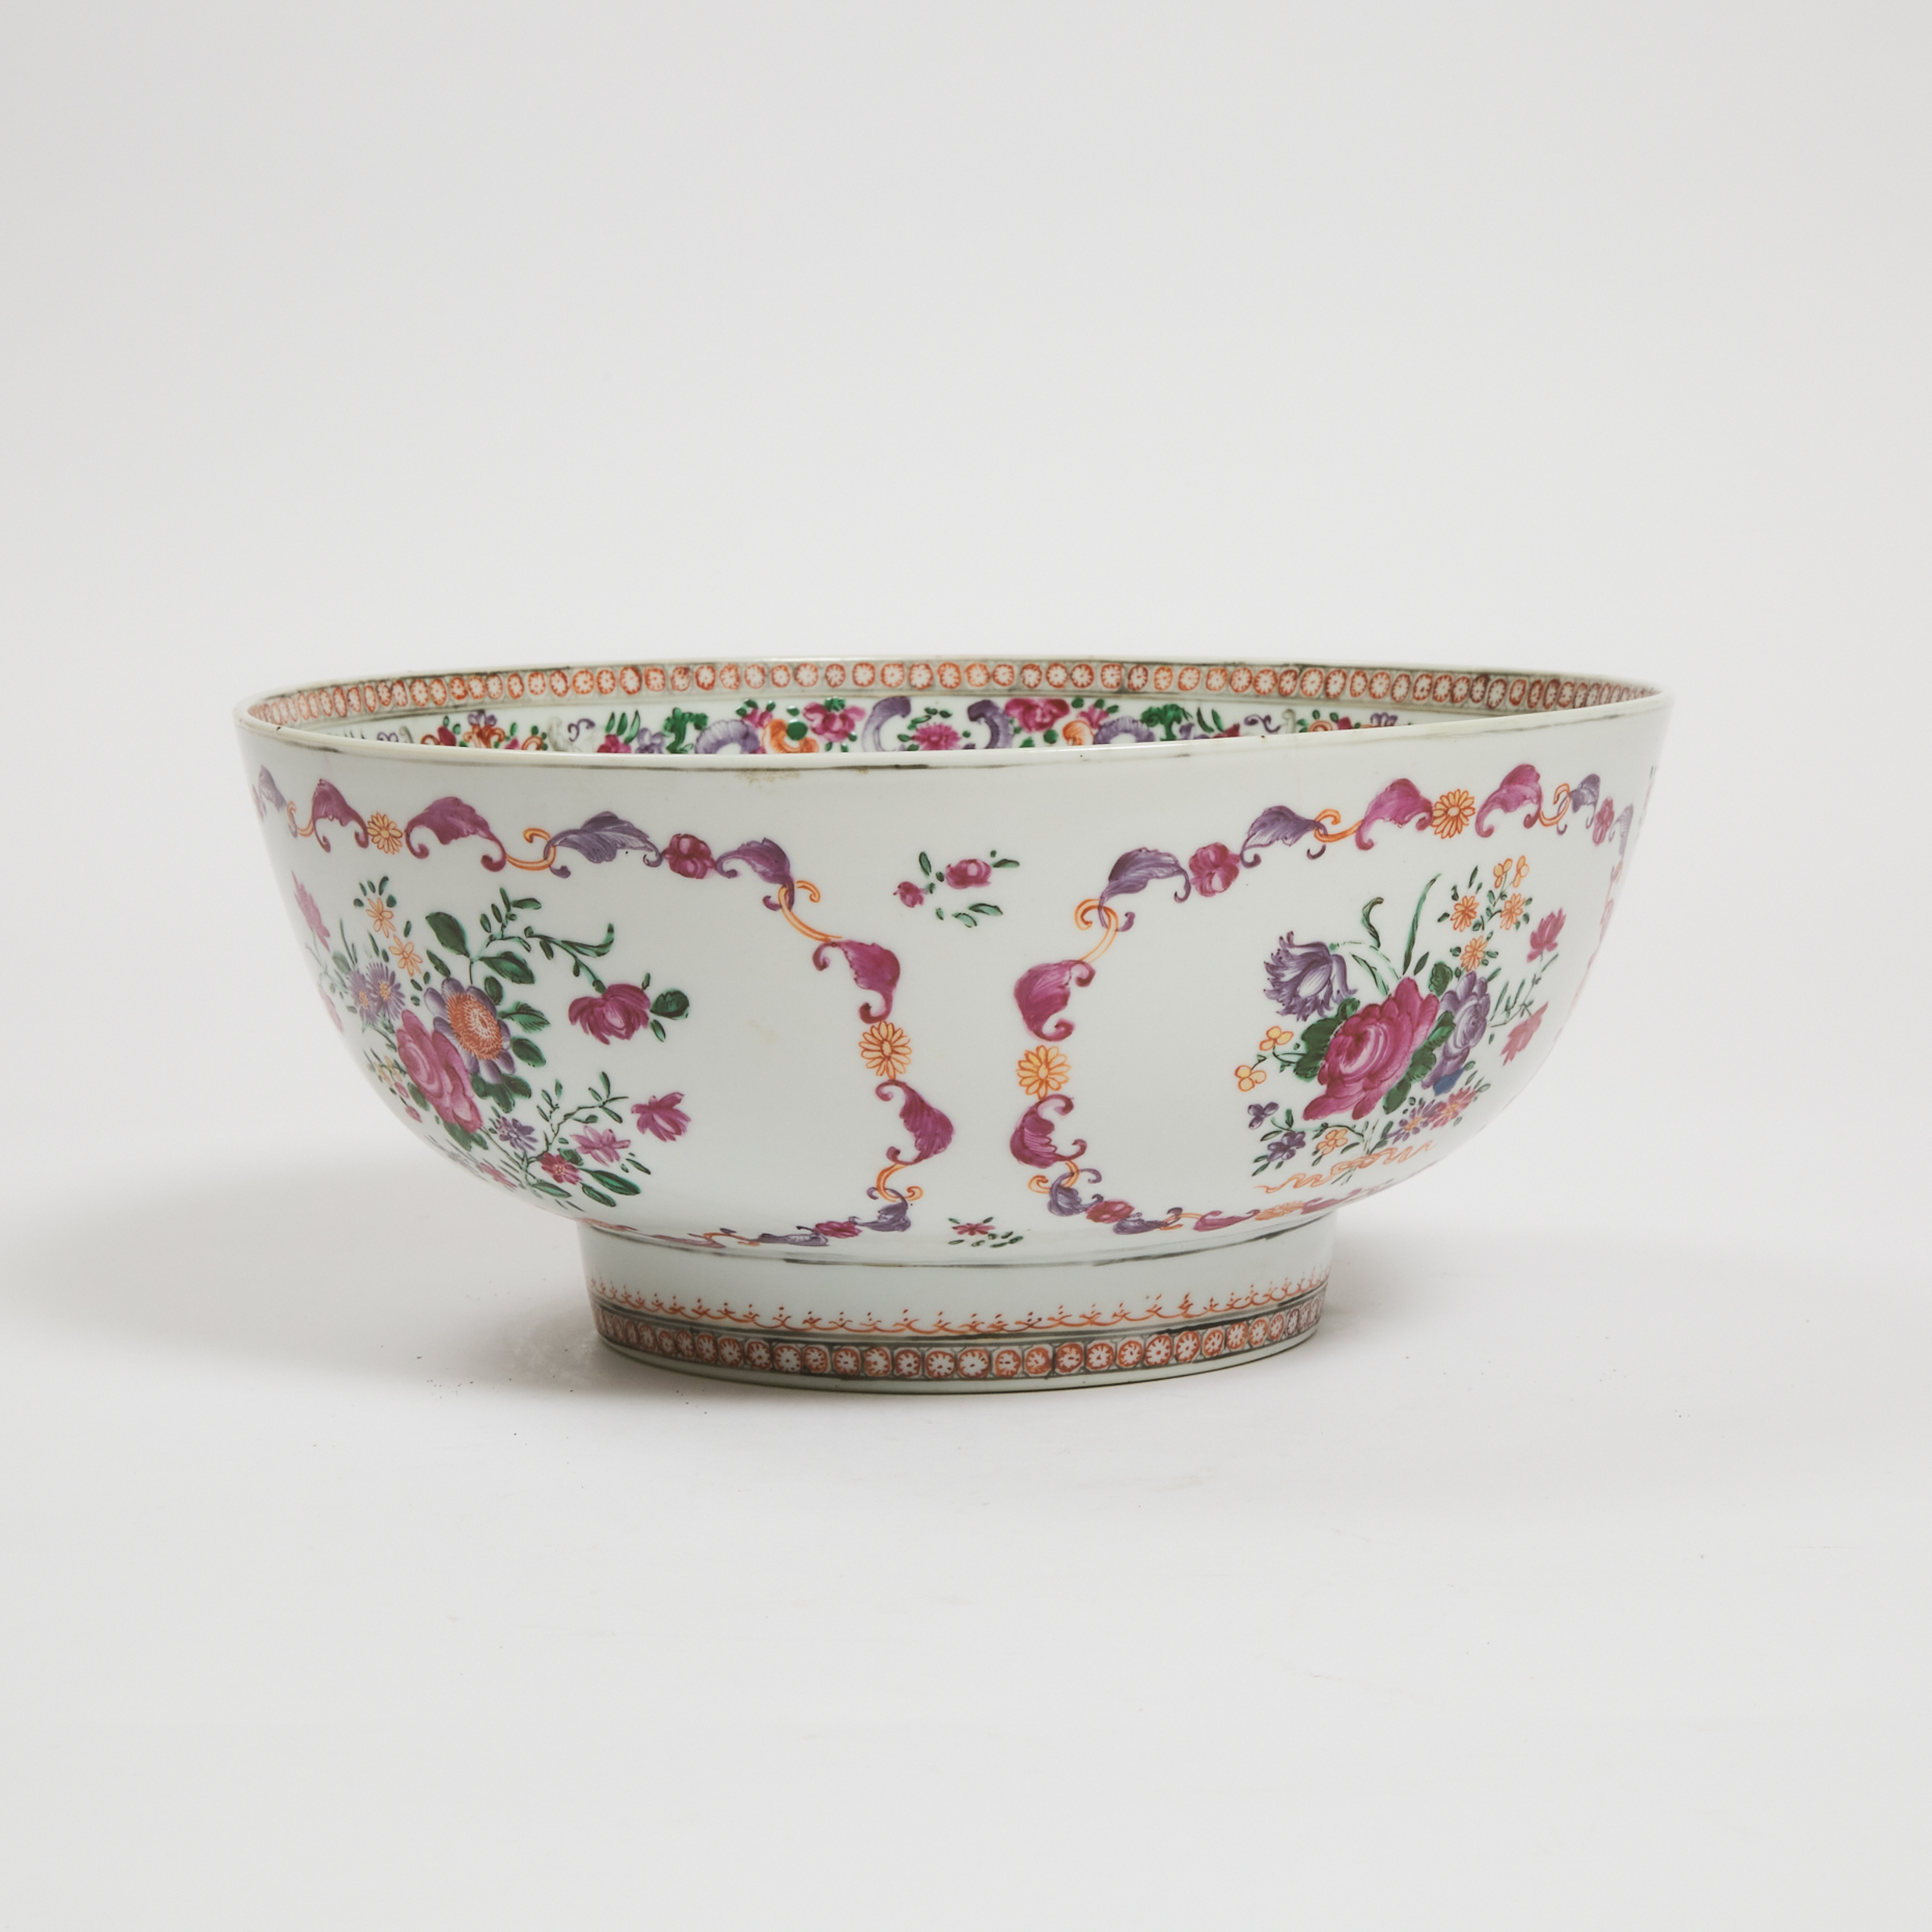 A Chinese Export Famille Rose Punch Bowl, Qianlong Period, 18th Century